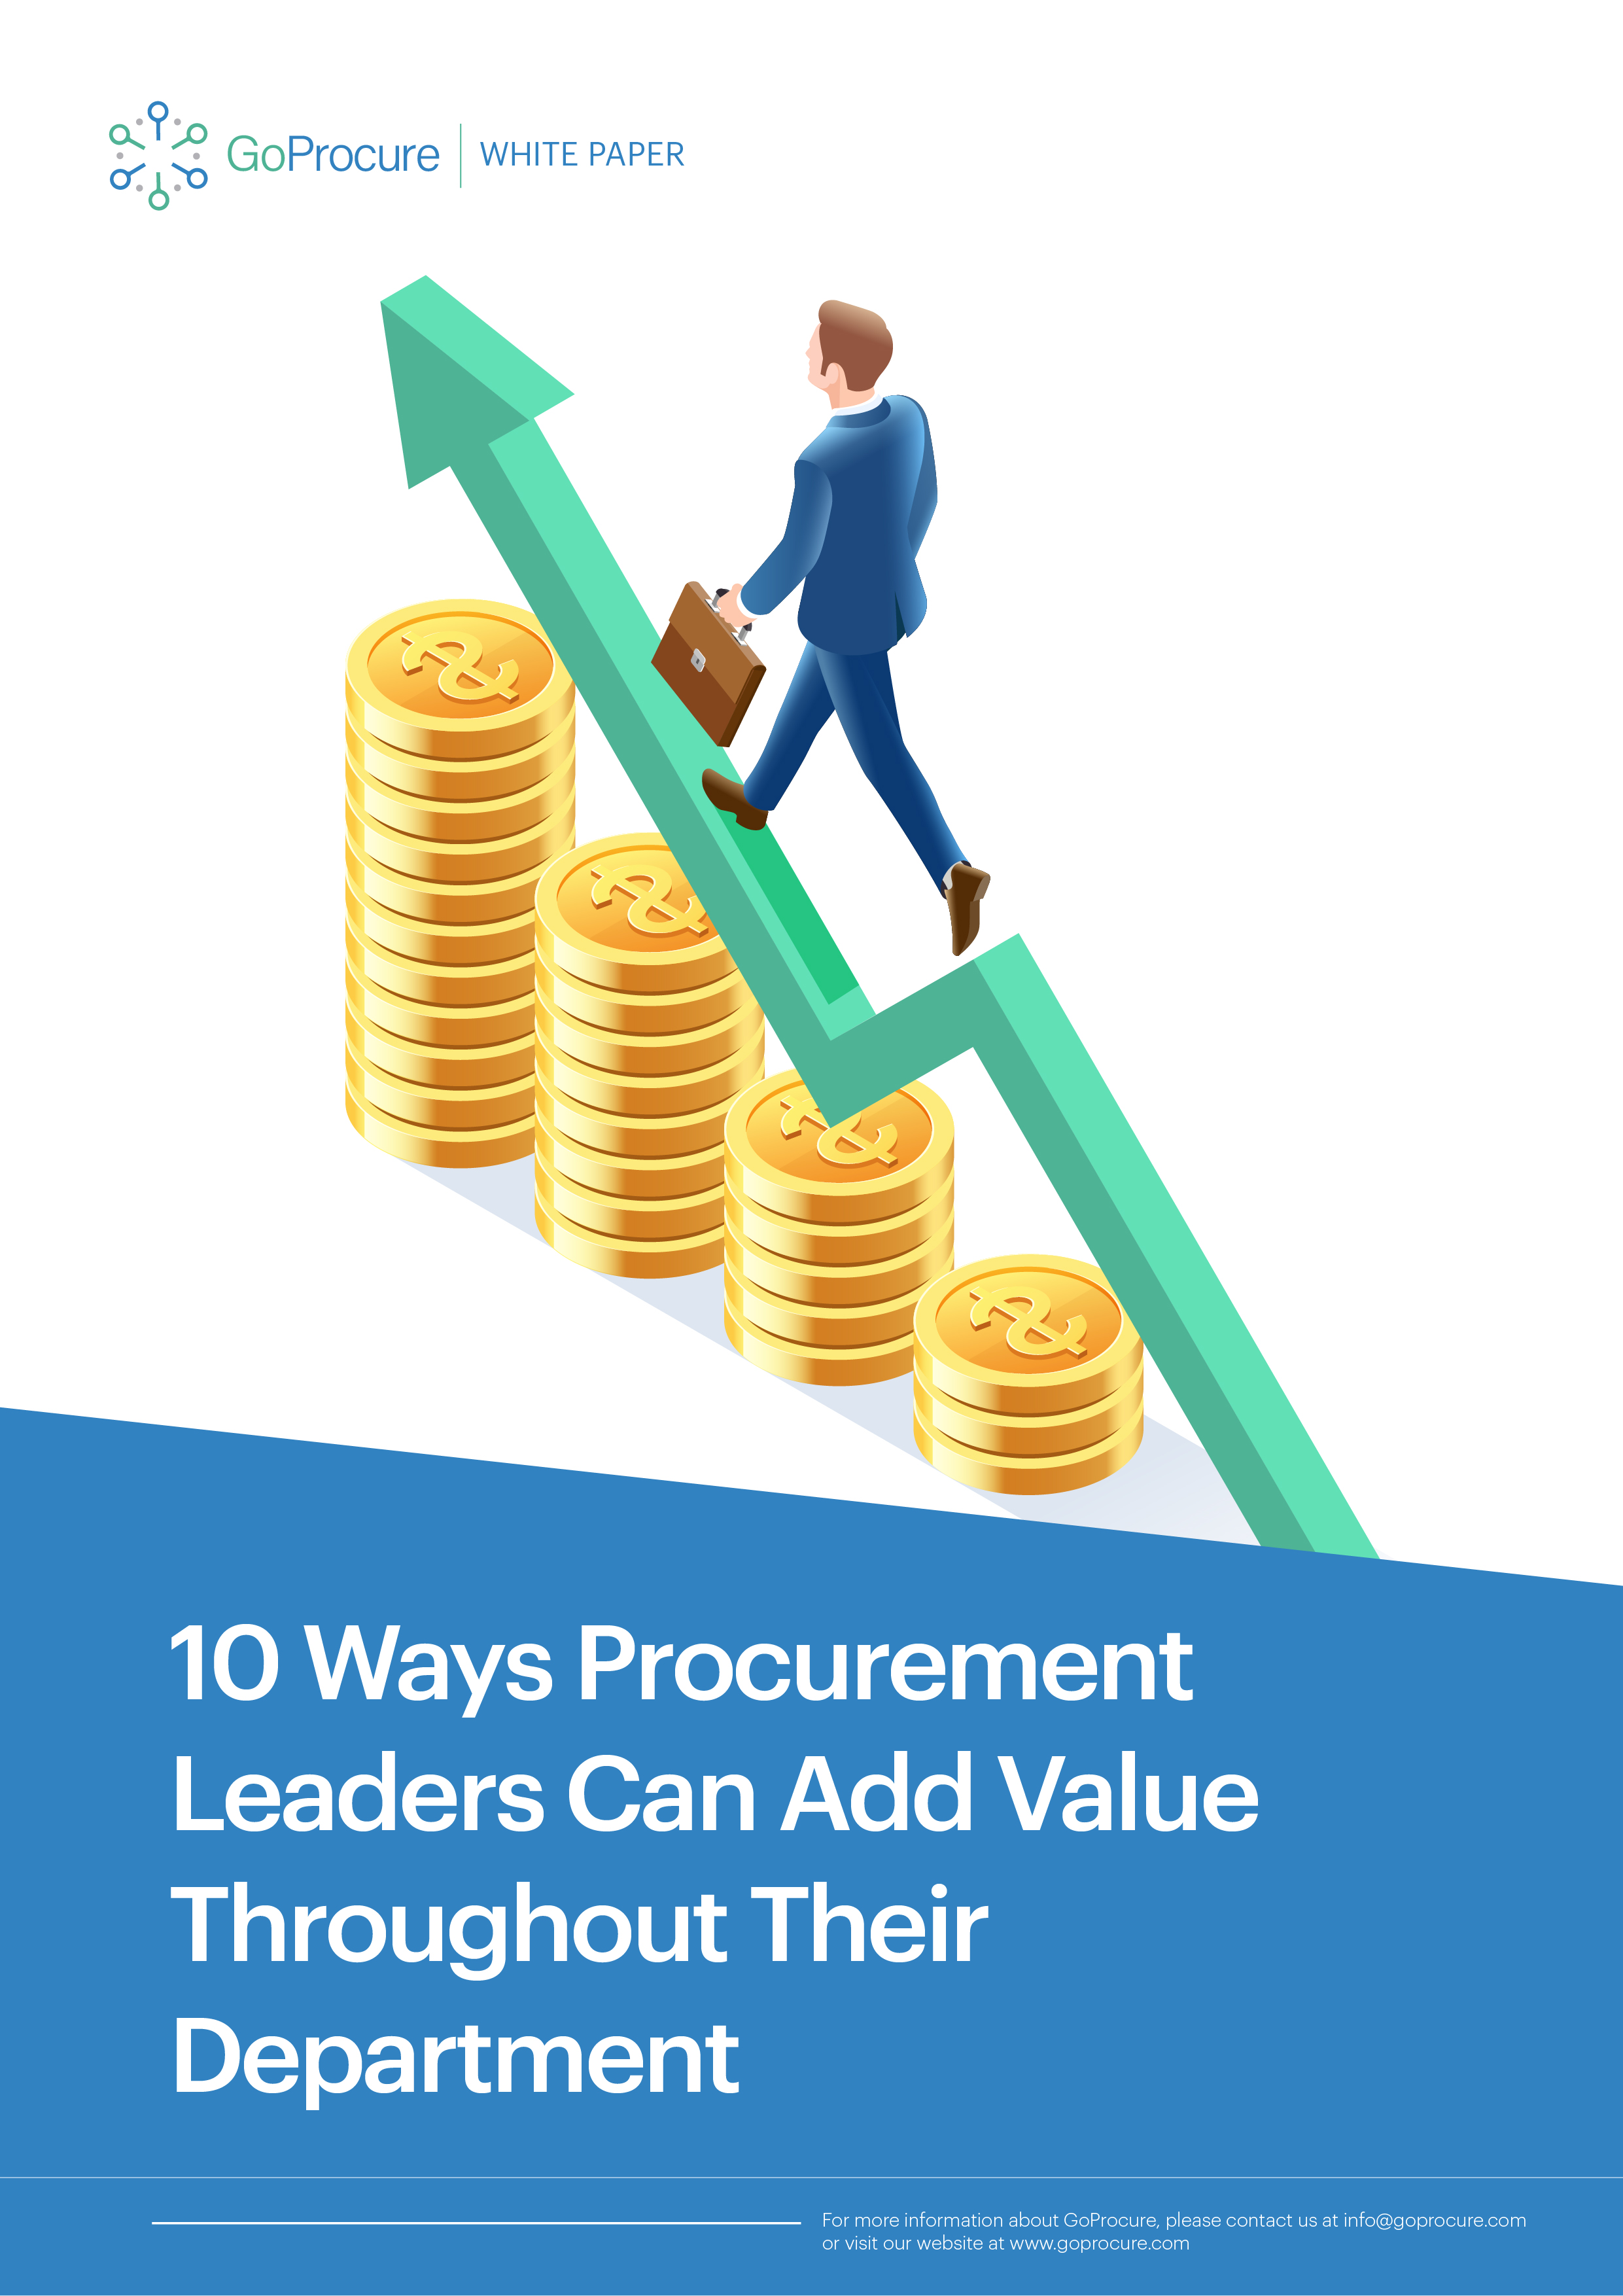 10 Ways Procurement Leaders Can Add Value Throughout Their Department